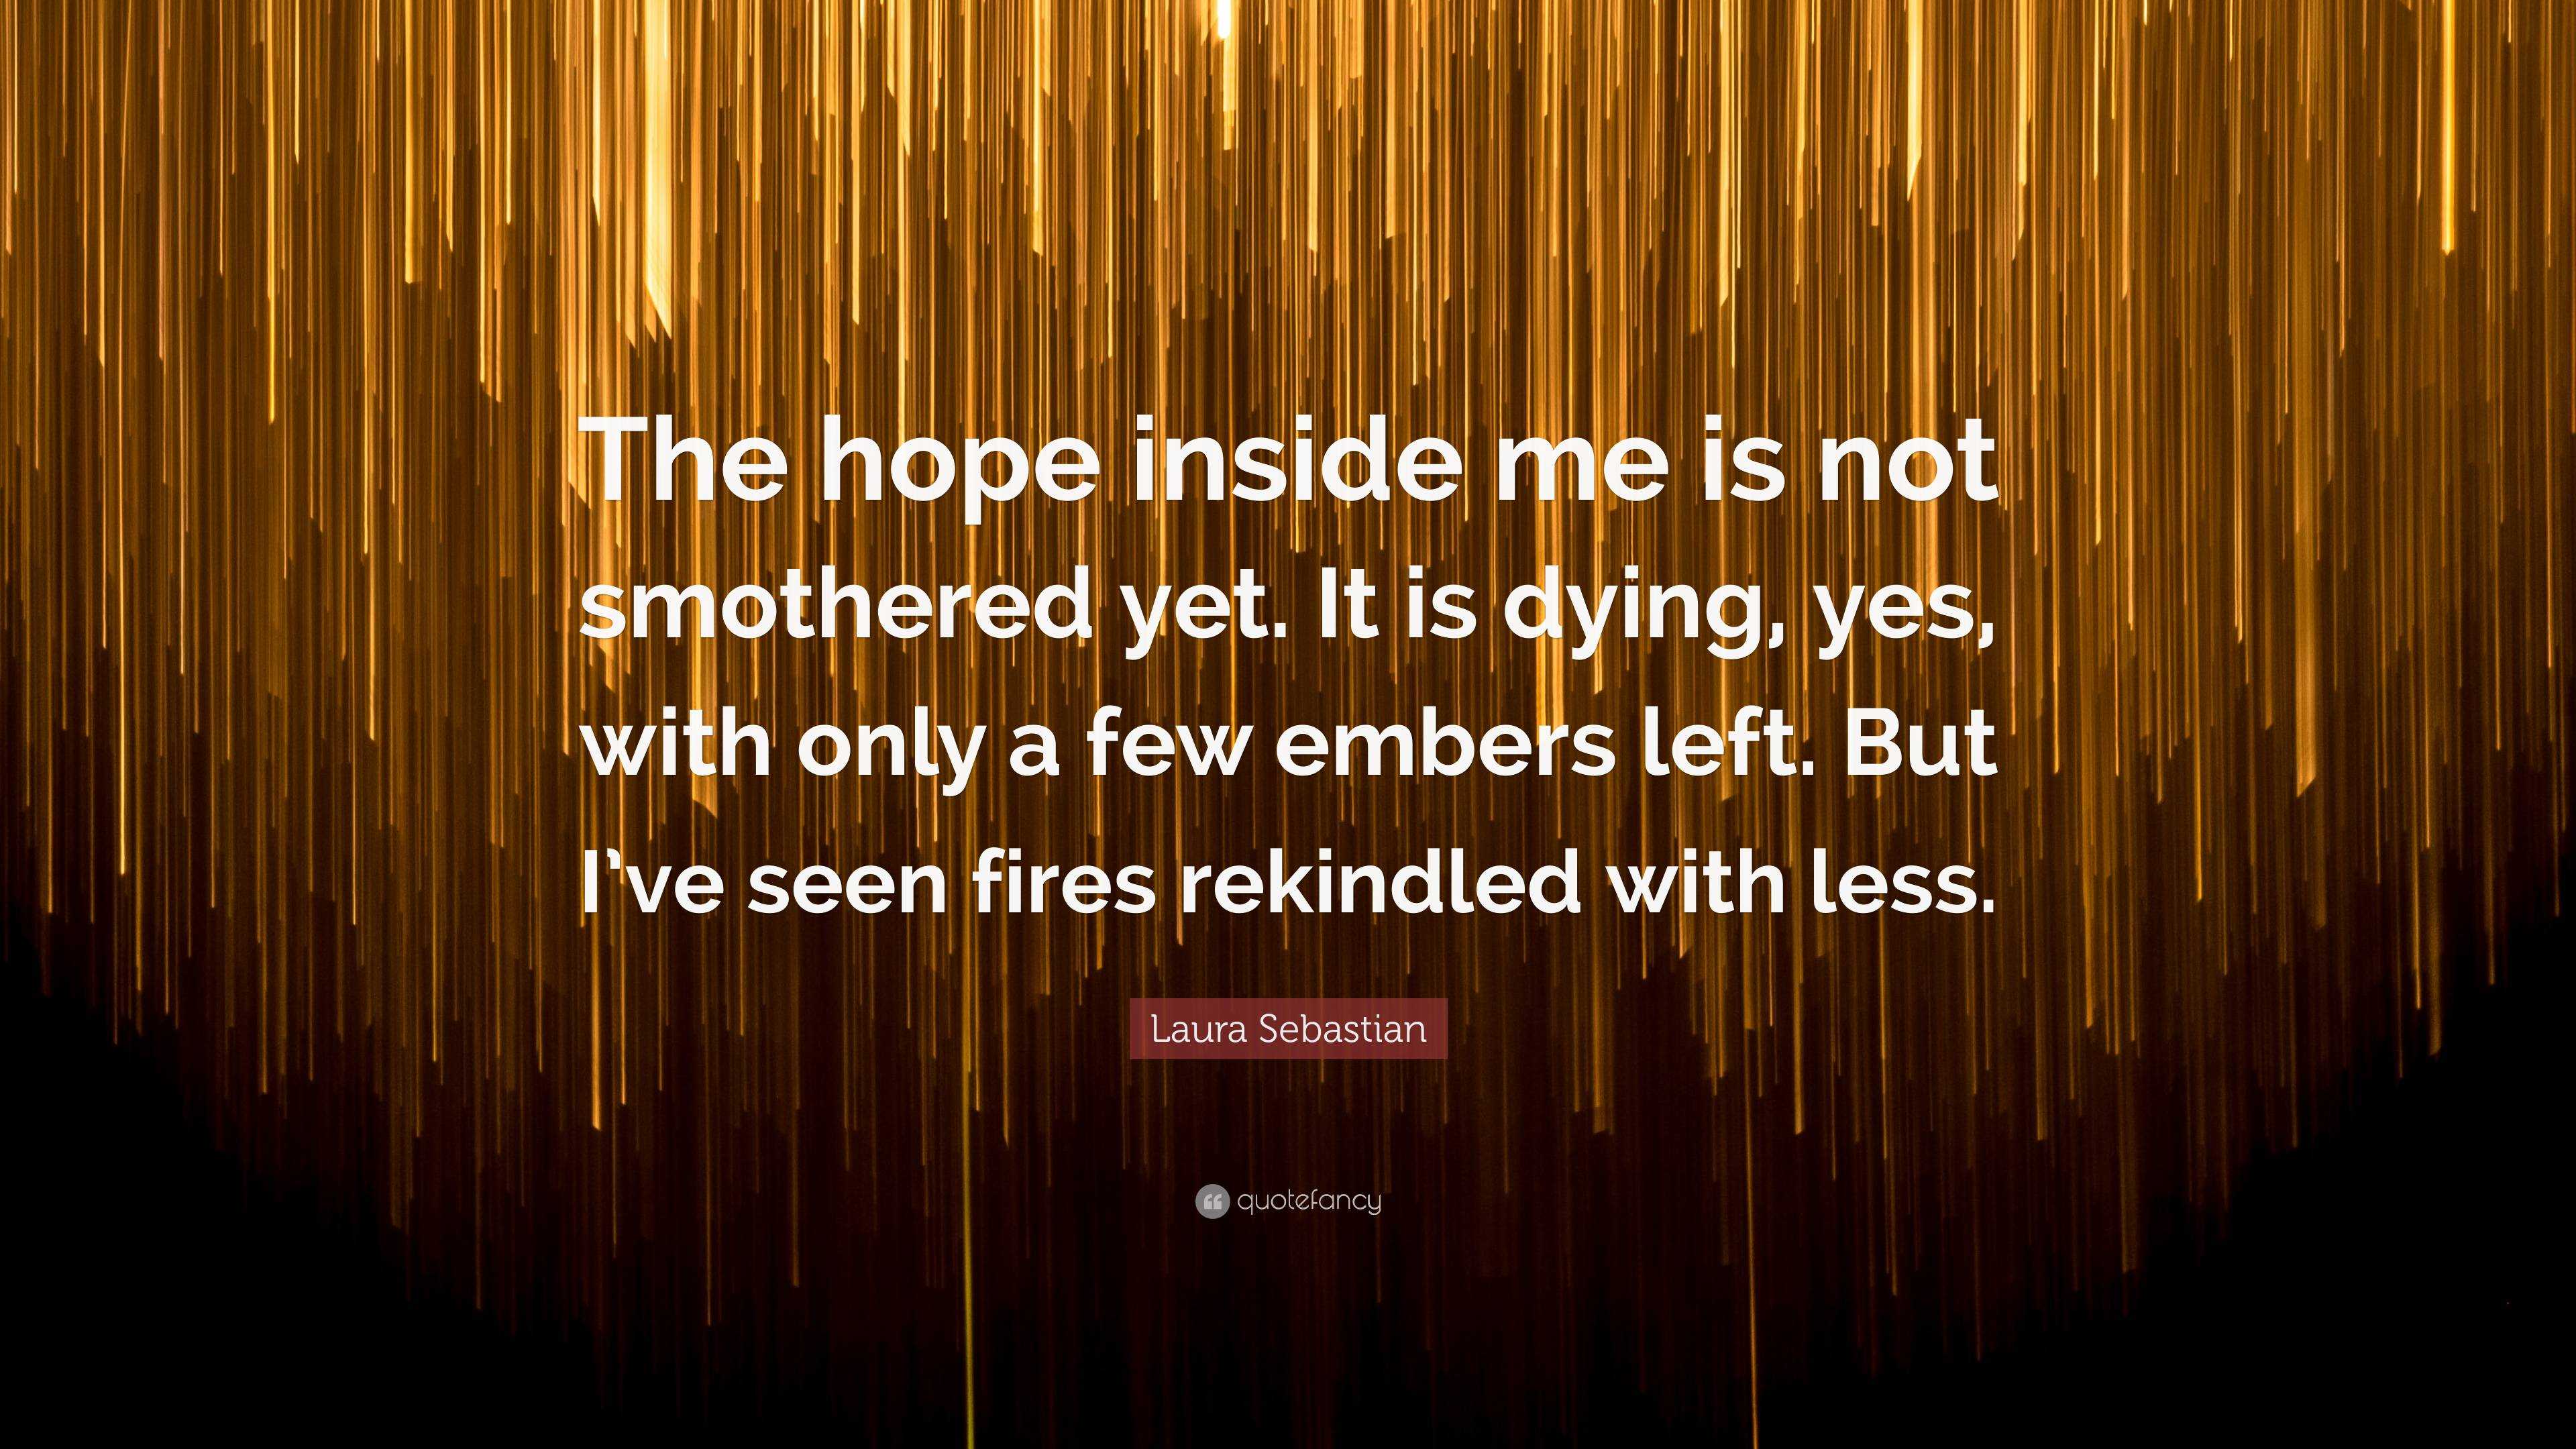 Laura Sebastian Quote: “The hope inside me is not smothered yet